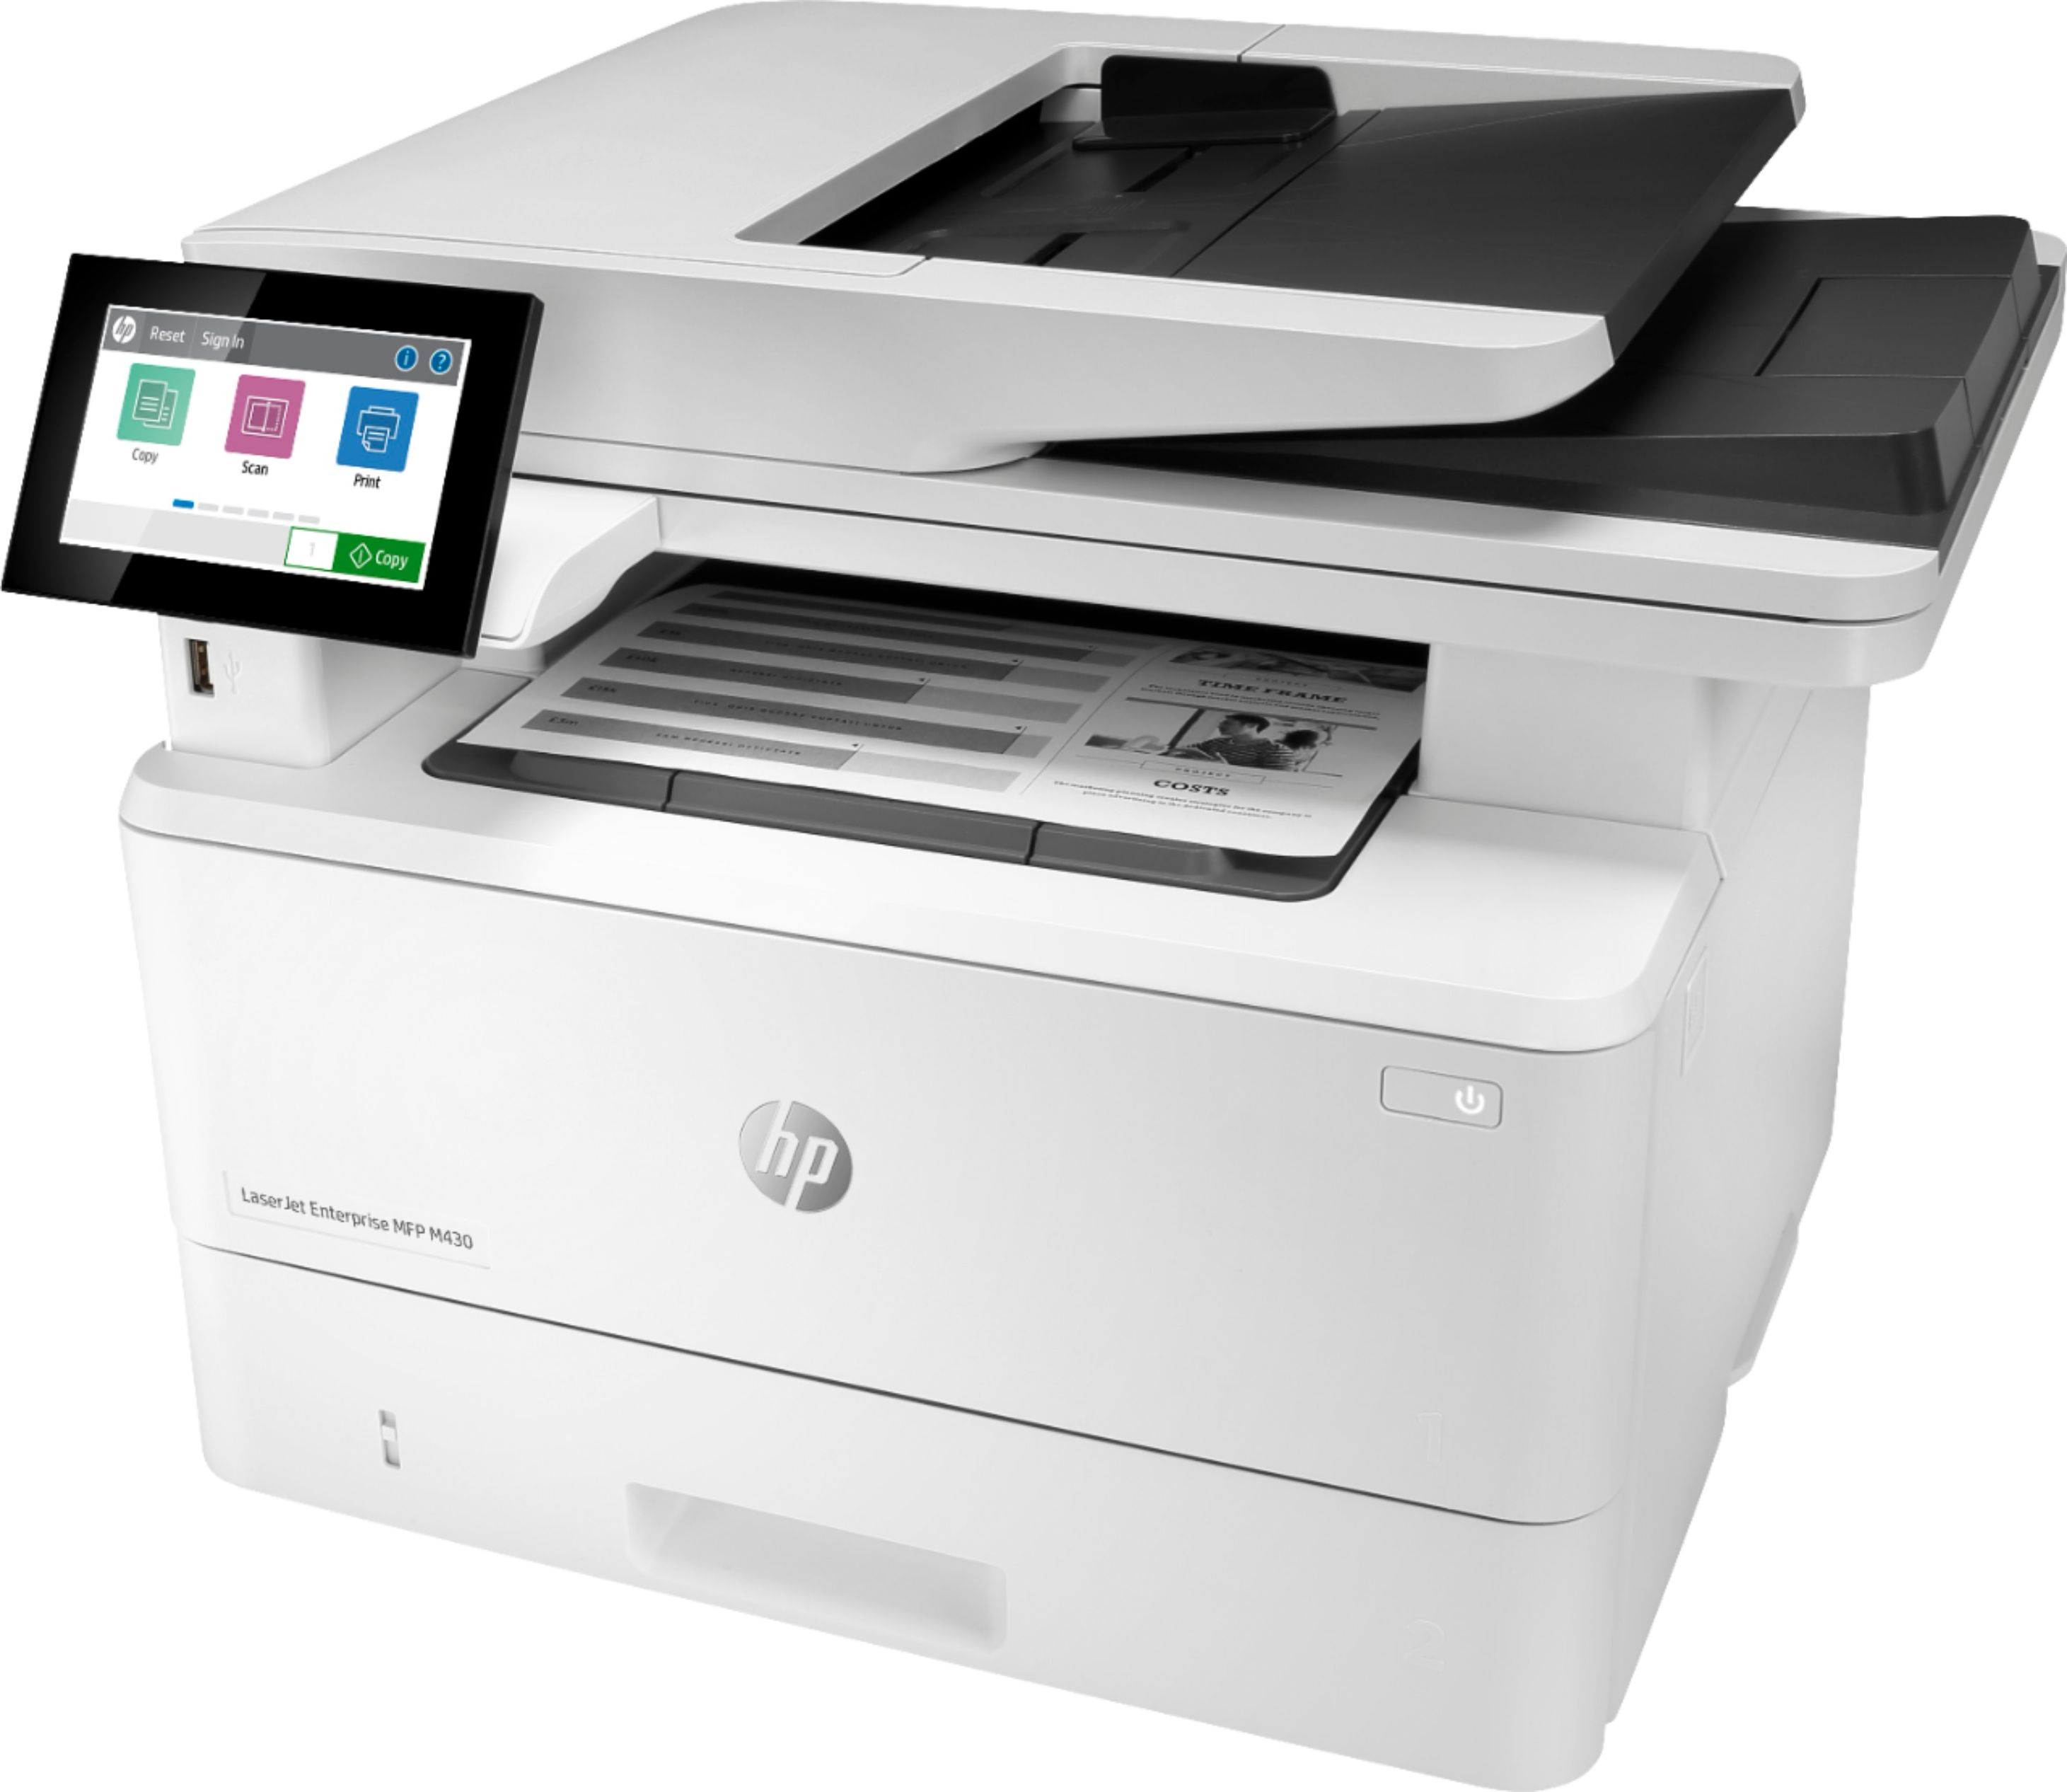 Angle View: HP - LaserJet Enterprise M430F Black-and-White All-In-One Laser Printer - White